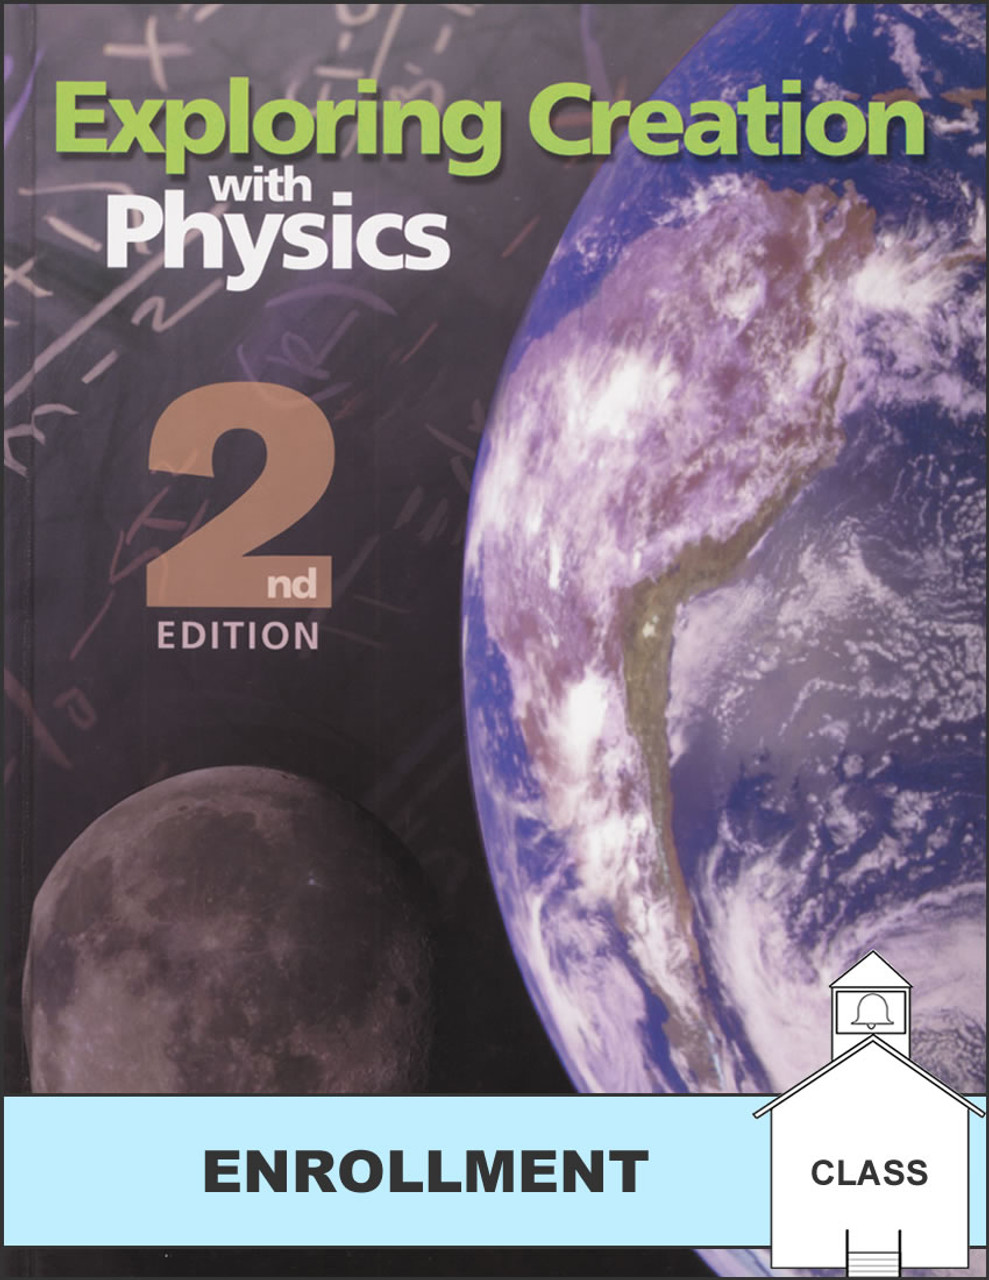 Exploring Creation with Physics, 2nd edition